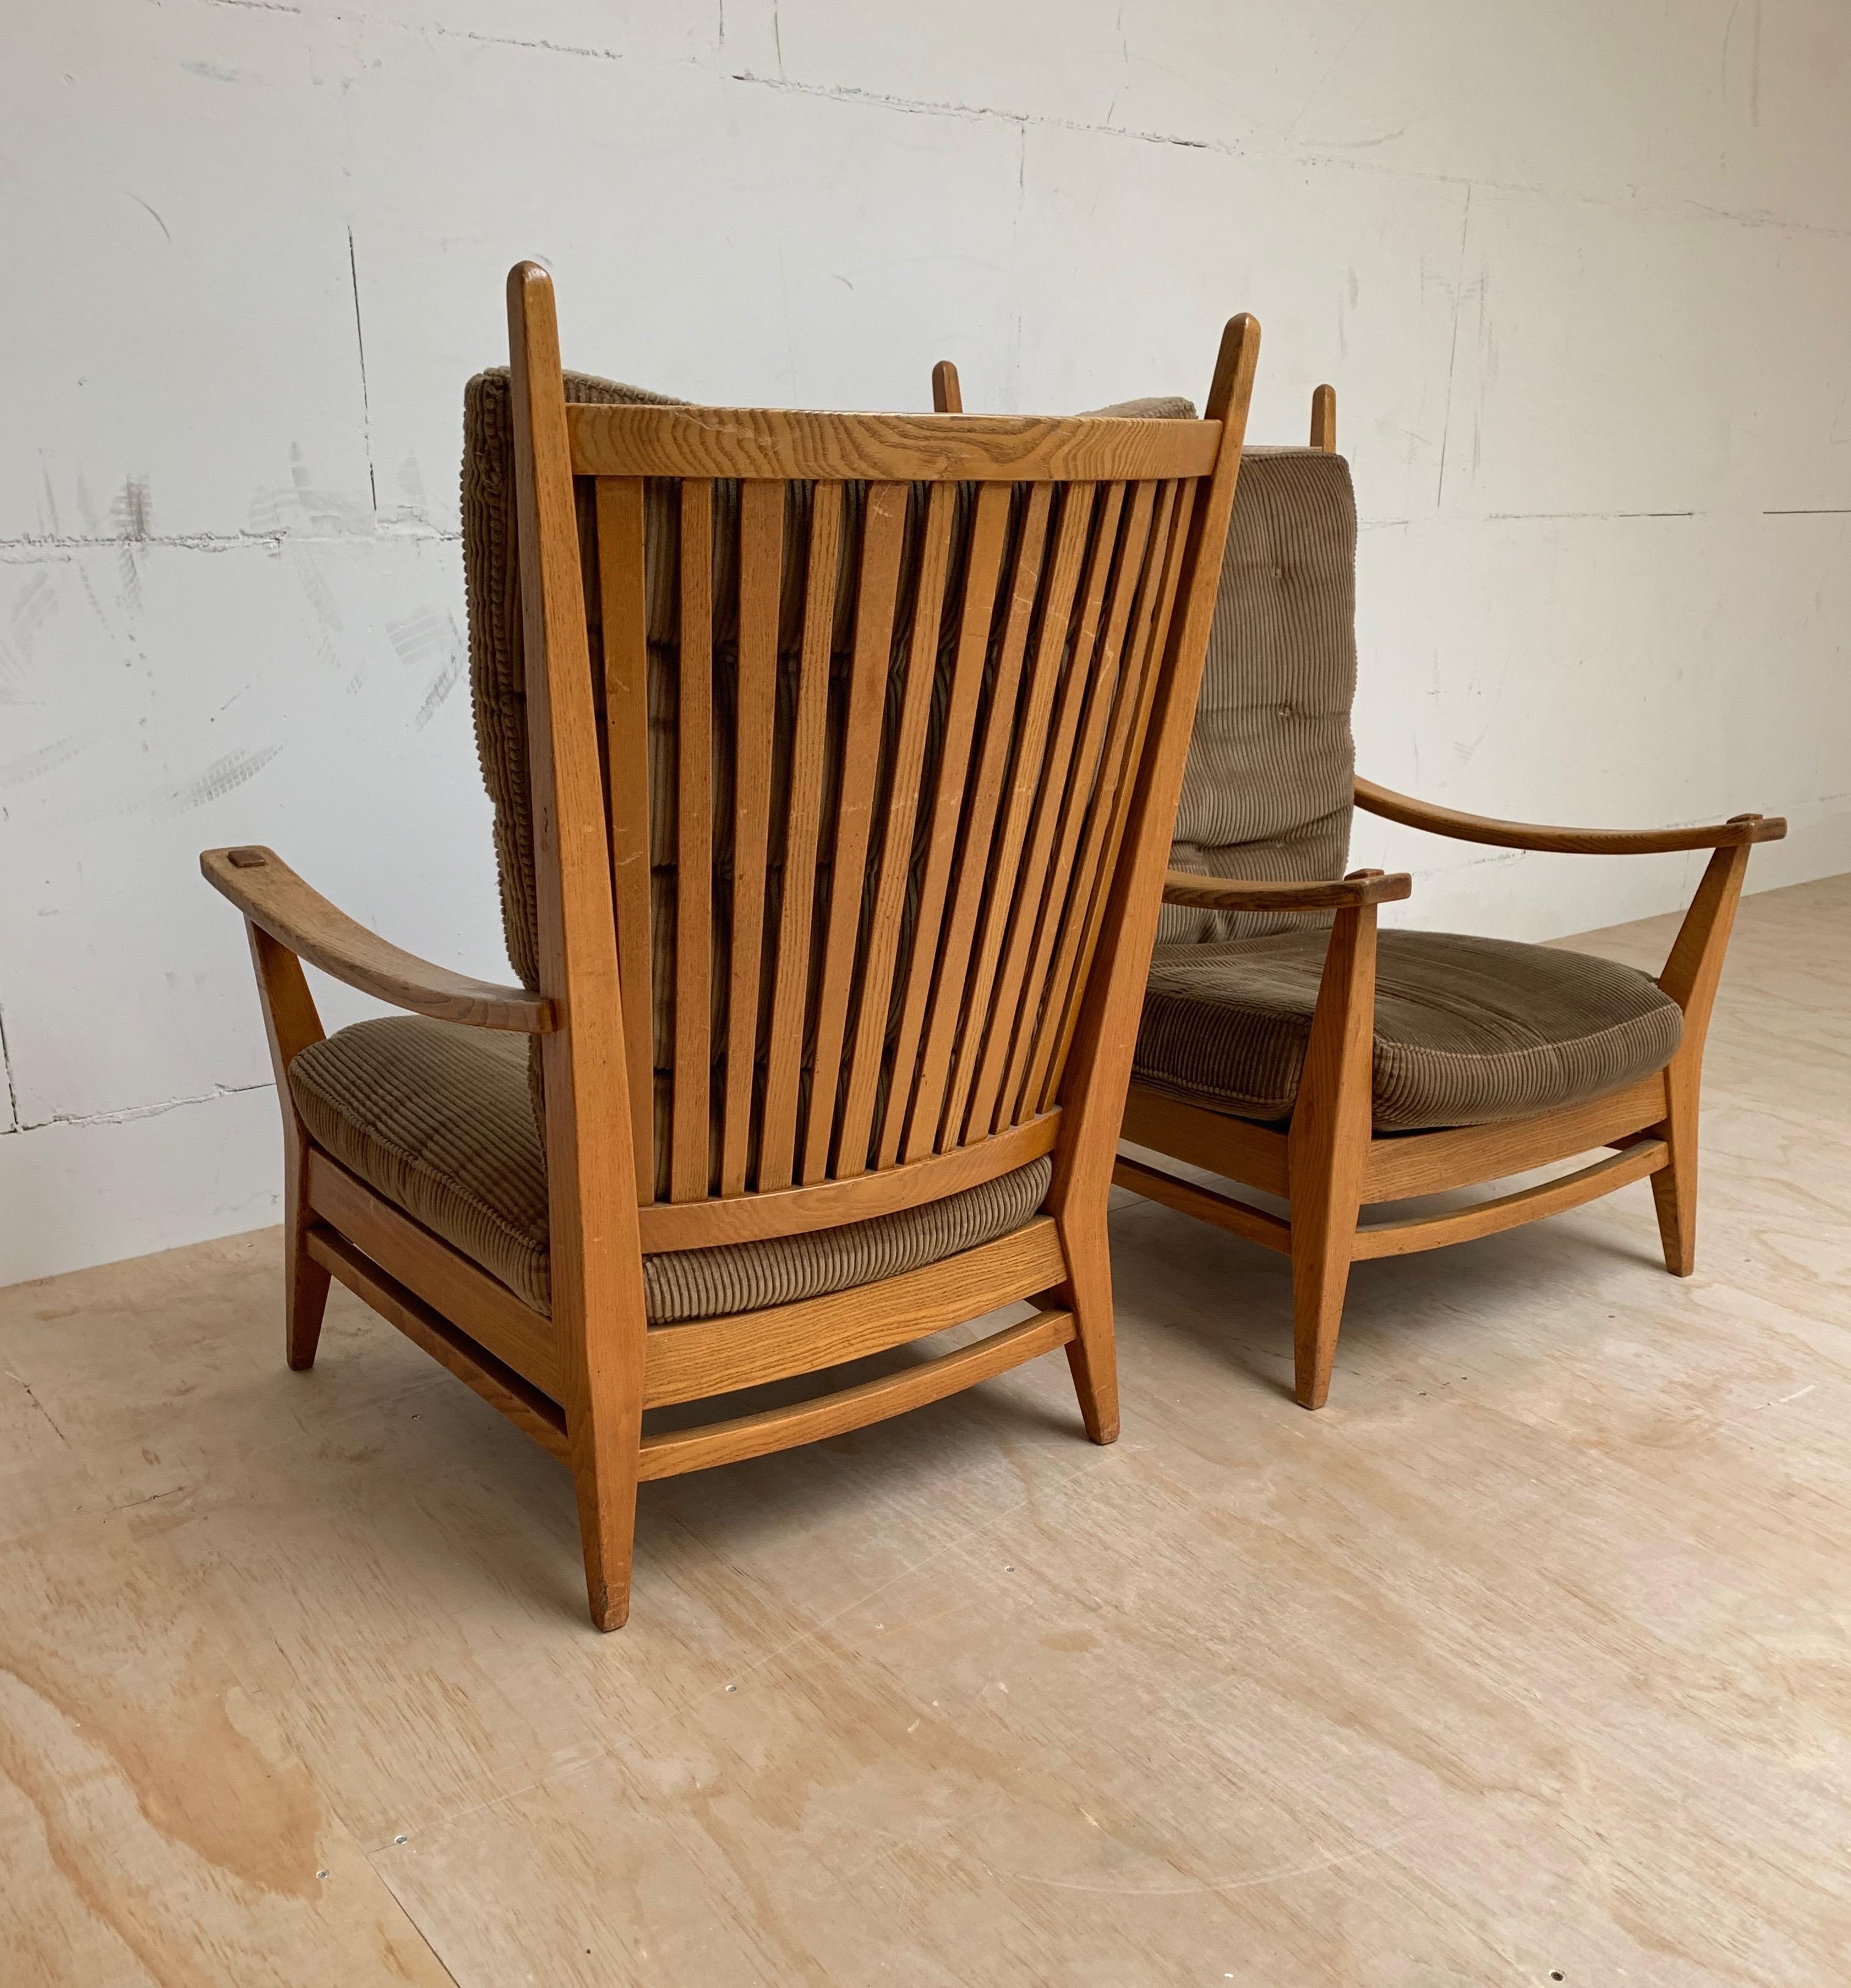 Arts and Crafts 1930-1940, Rare Pair of Modernist Design Oak Lounge Chairs by Bas Van Pelt For Sale